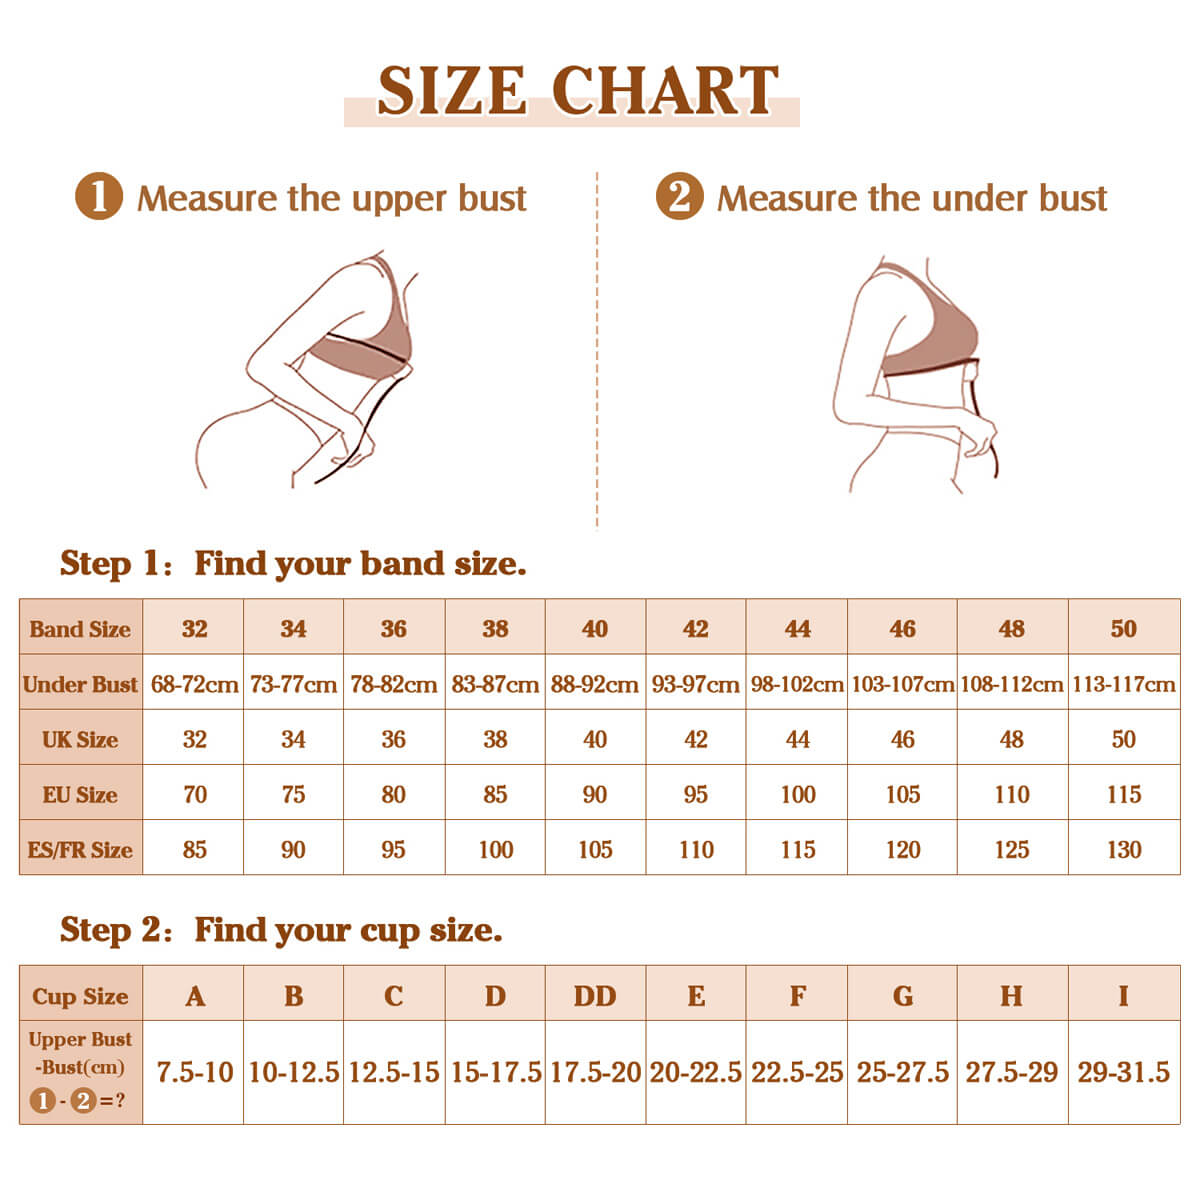 Download 229 X - Bra Sister Size Chart Us PNG Image with No